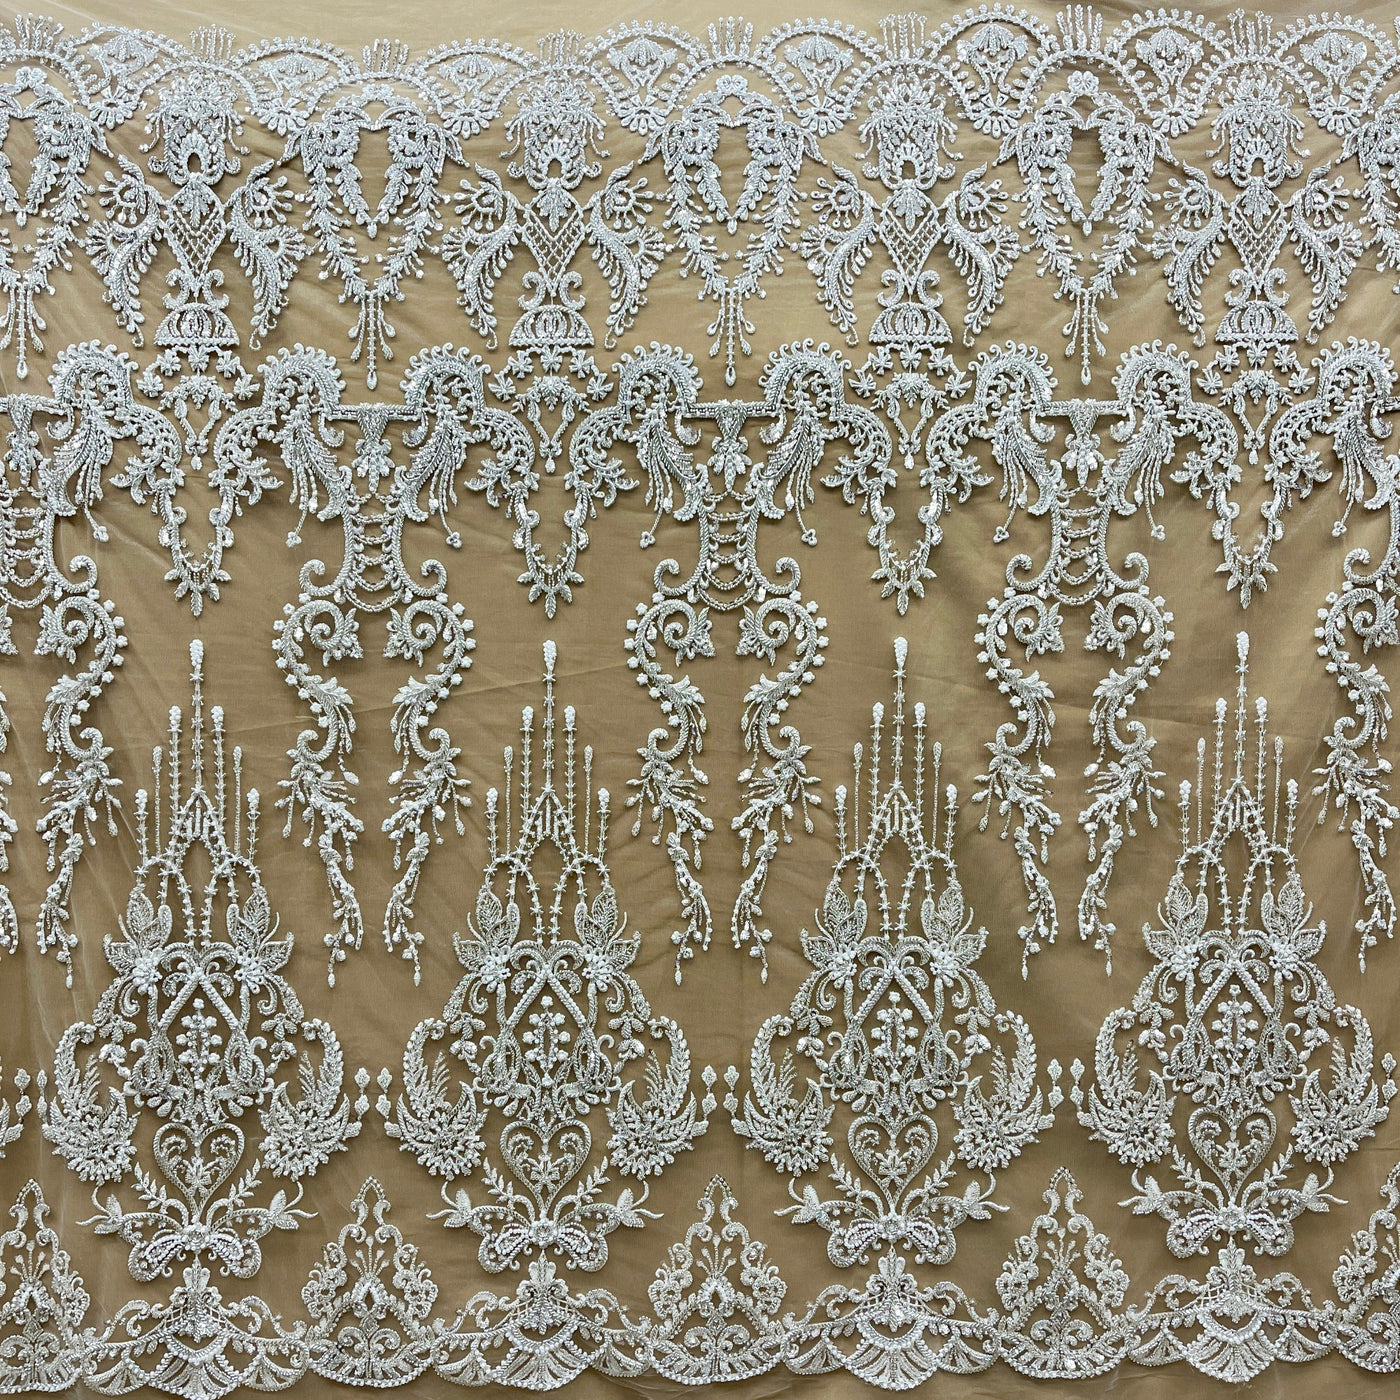 Beaded Lace Fabric Embroidered on 100% Polyester Net Mesh | Lace USA - GD-237189 Antique Silver